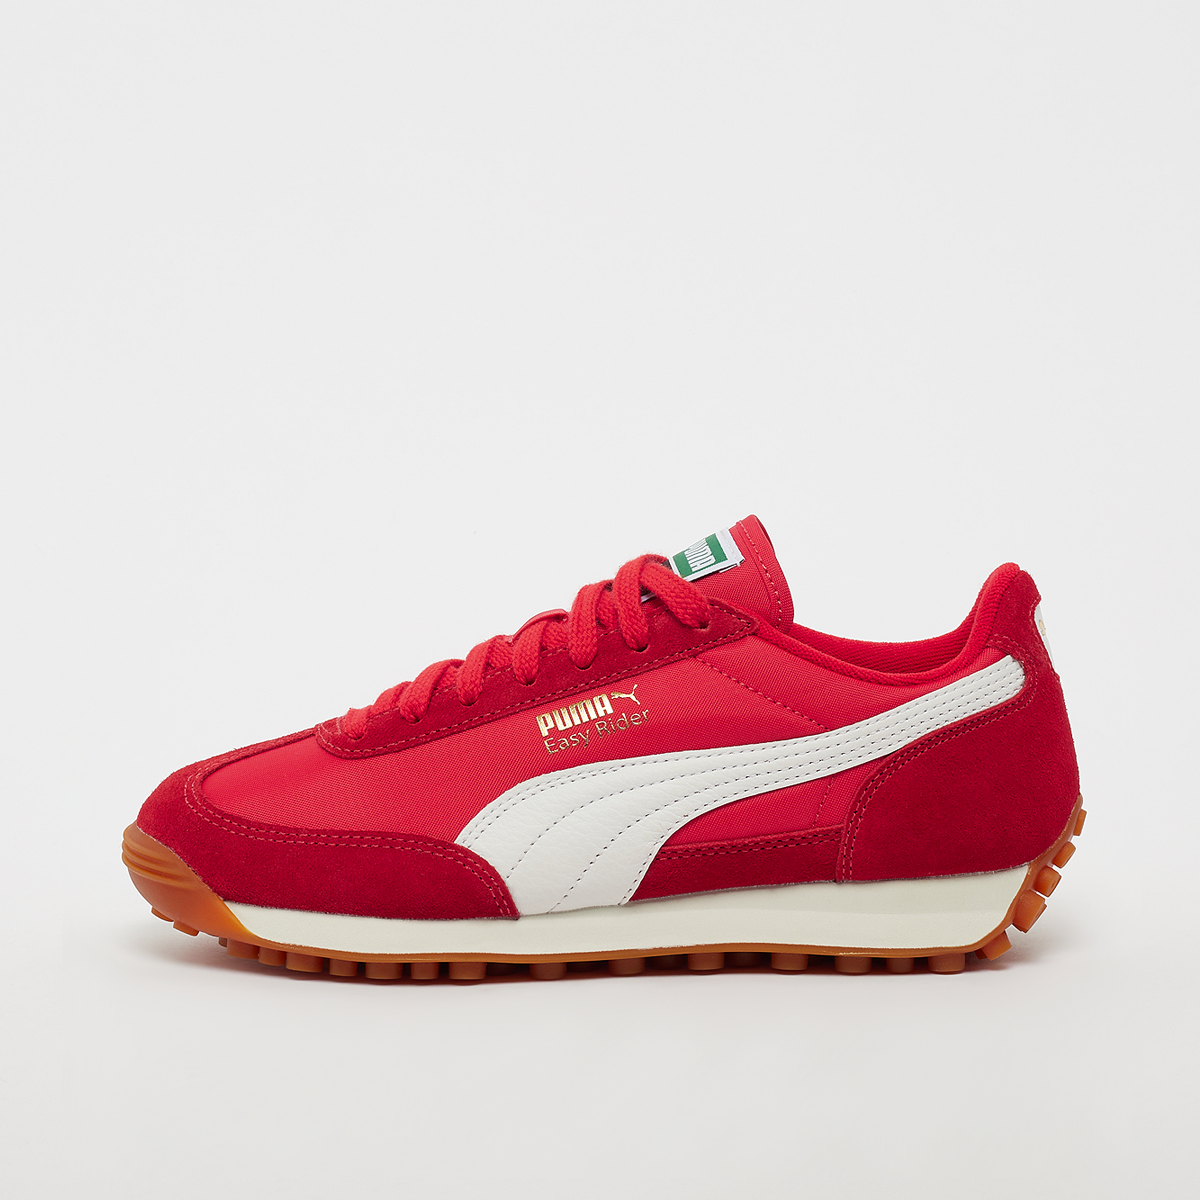 Easy Rider Vintage red/white, Puma, Footwear, red/white, taille: 36